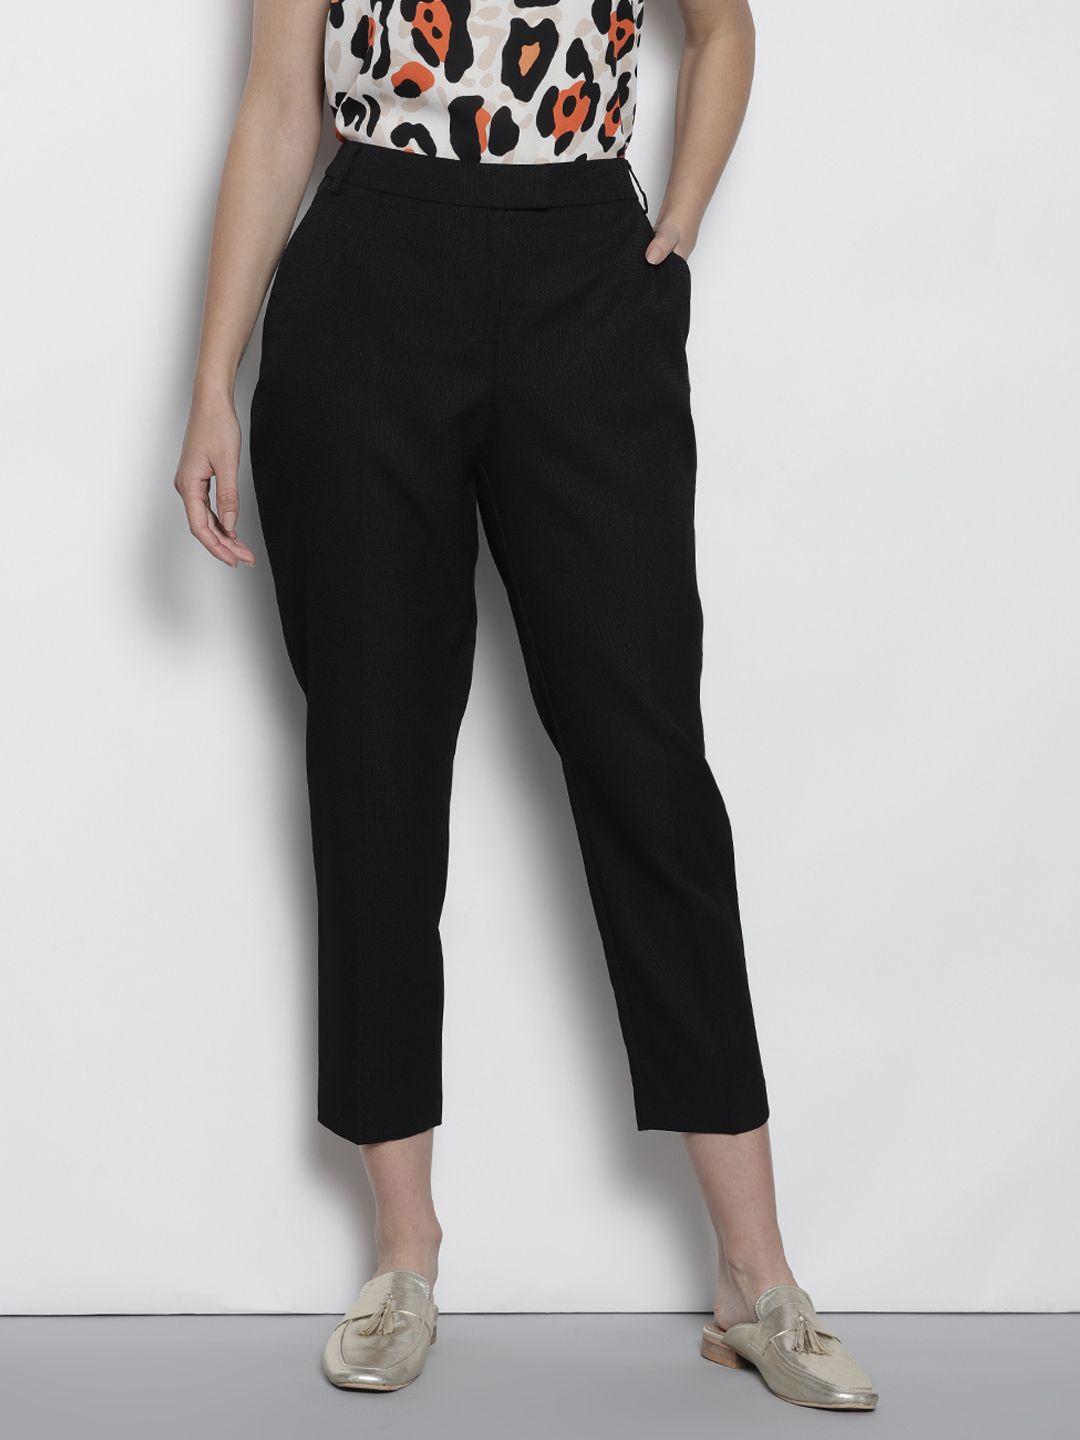 dorothy perkins women black regular fit textured cropped trousers